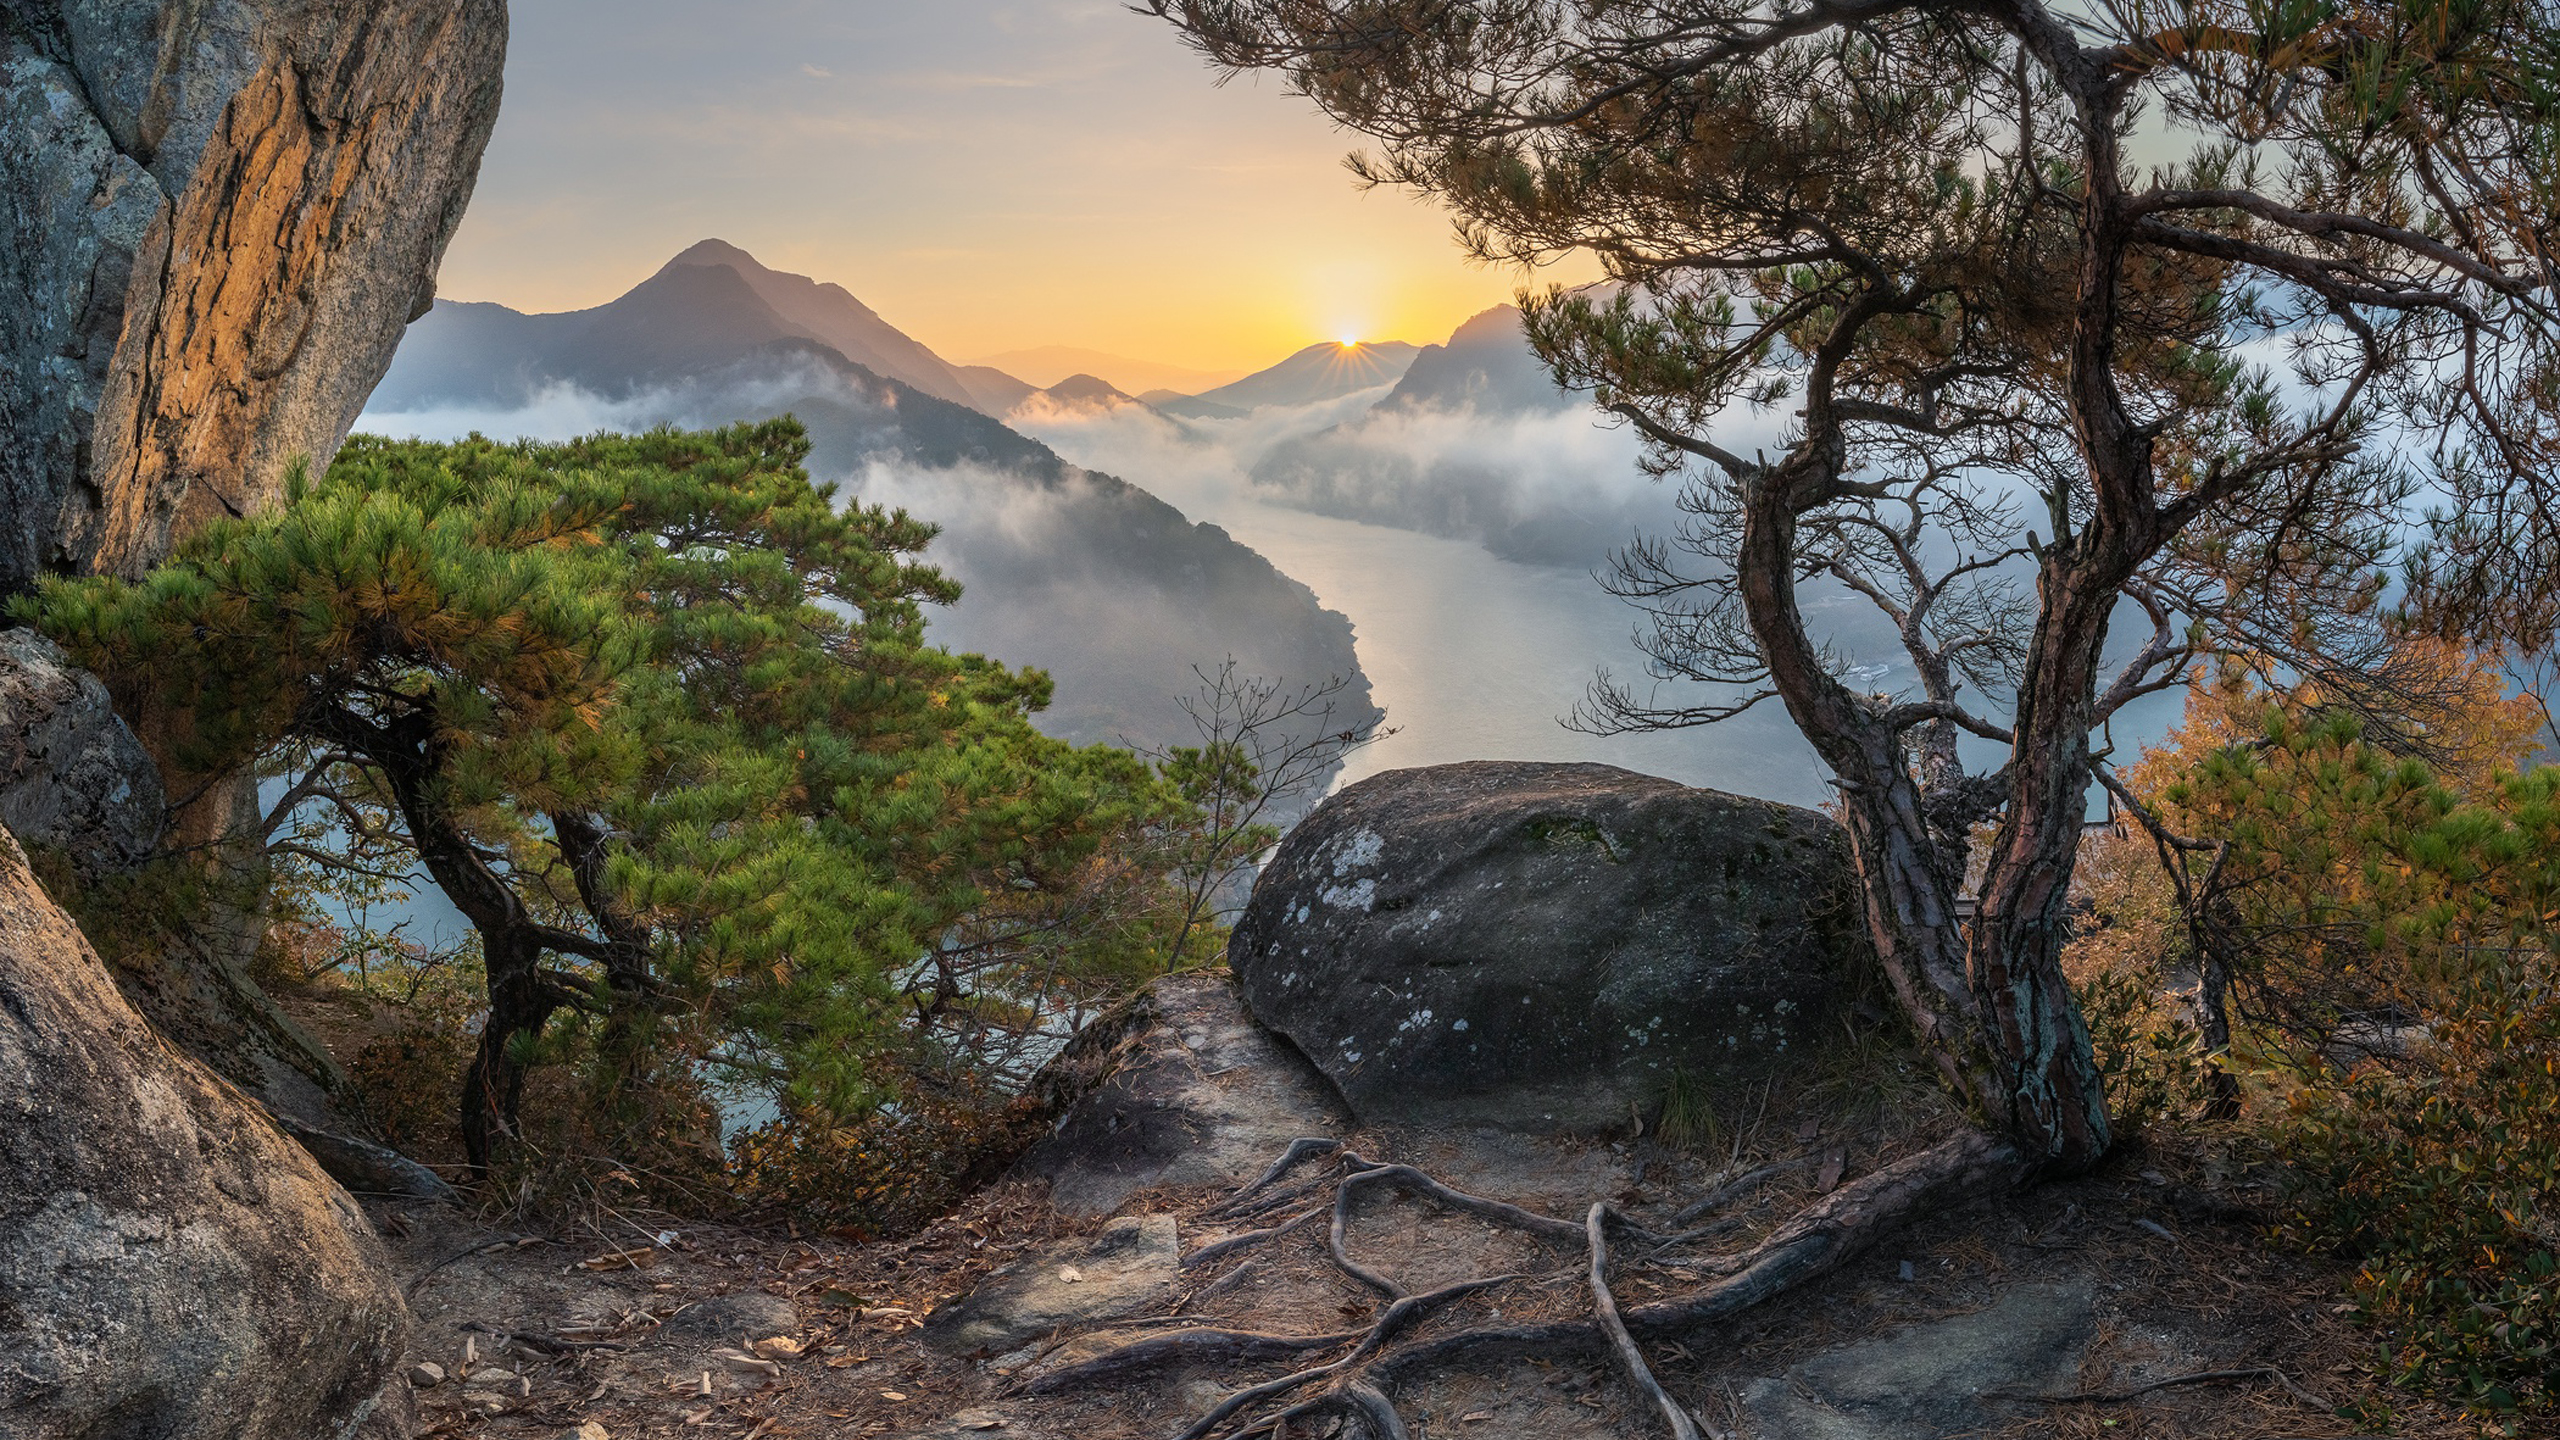 South Korea Mountain With Clouds And Tree Roots During Sunset 2K Nature